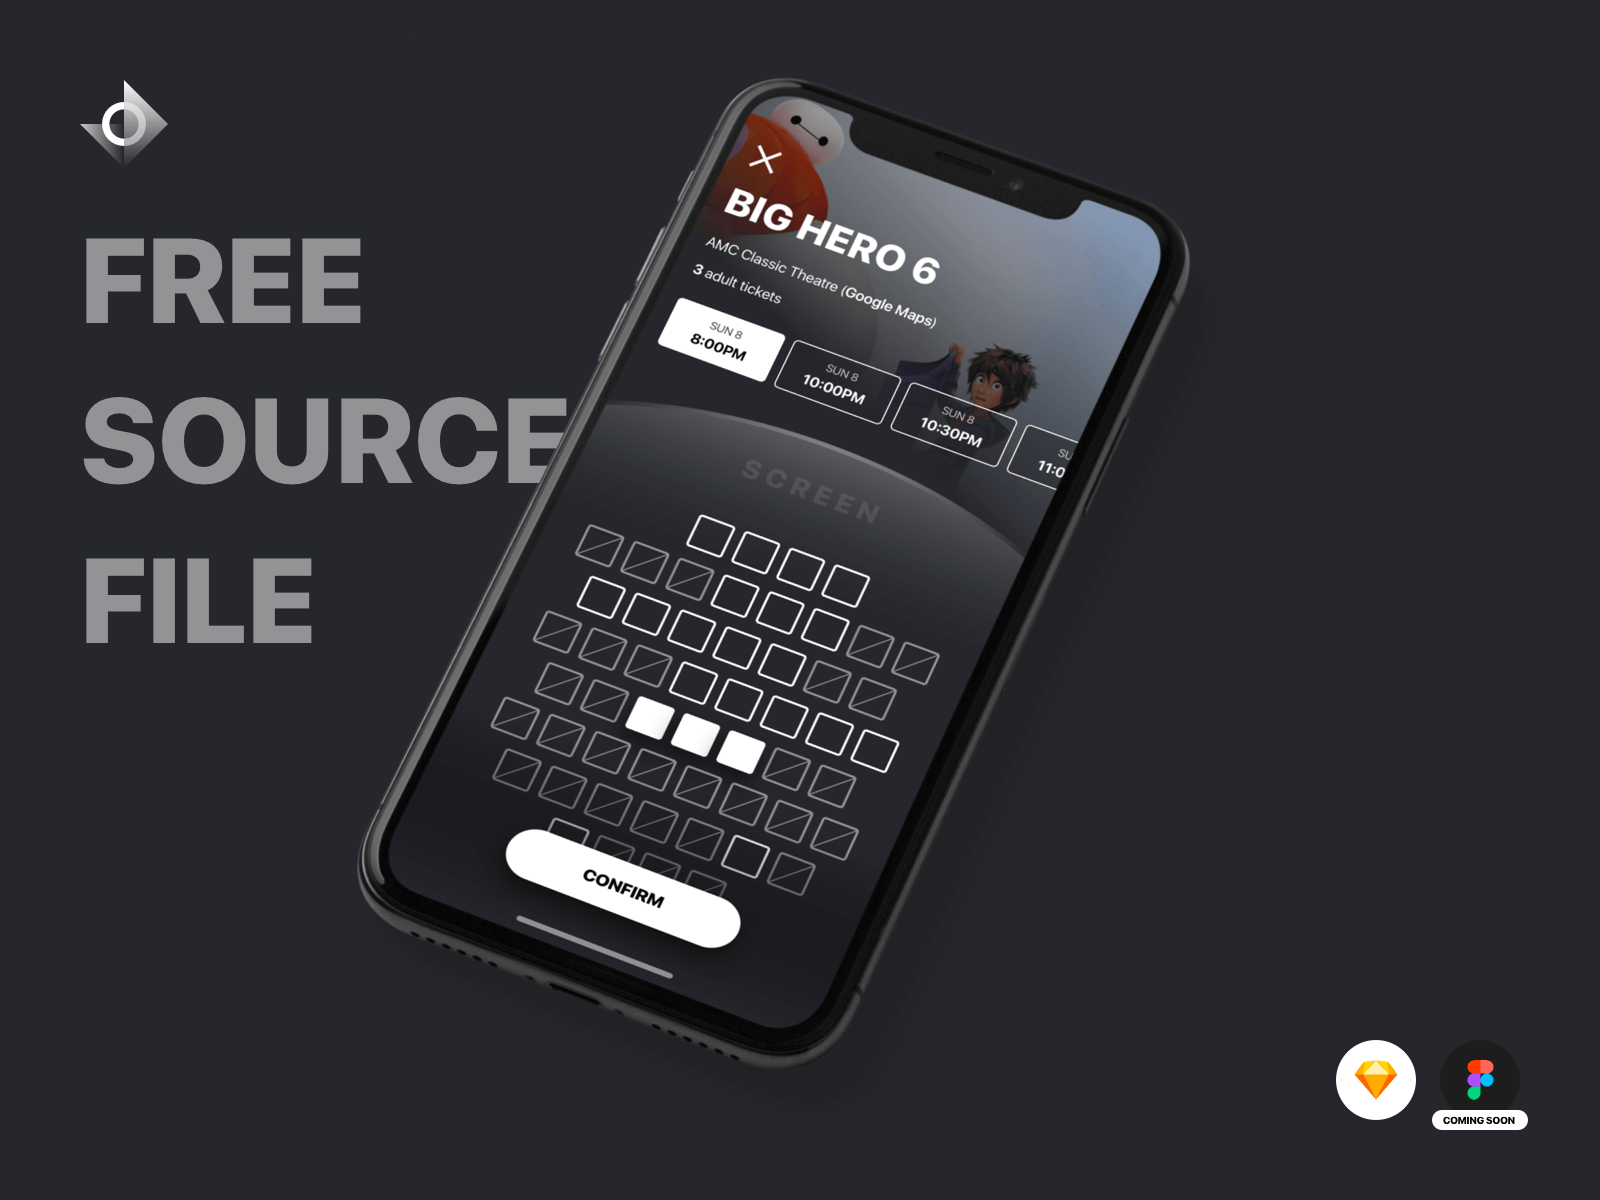 A mockup of a iPhone X movie ticket seat reservation app with the text "Free Source File!"